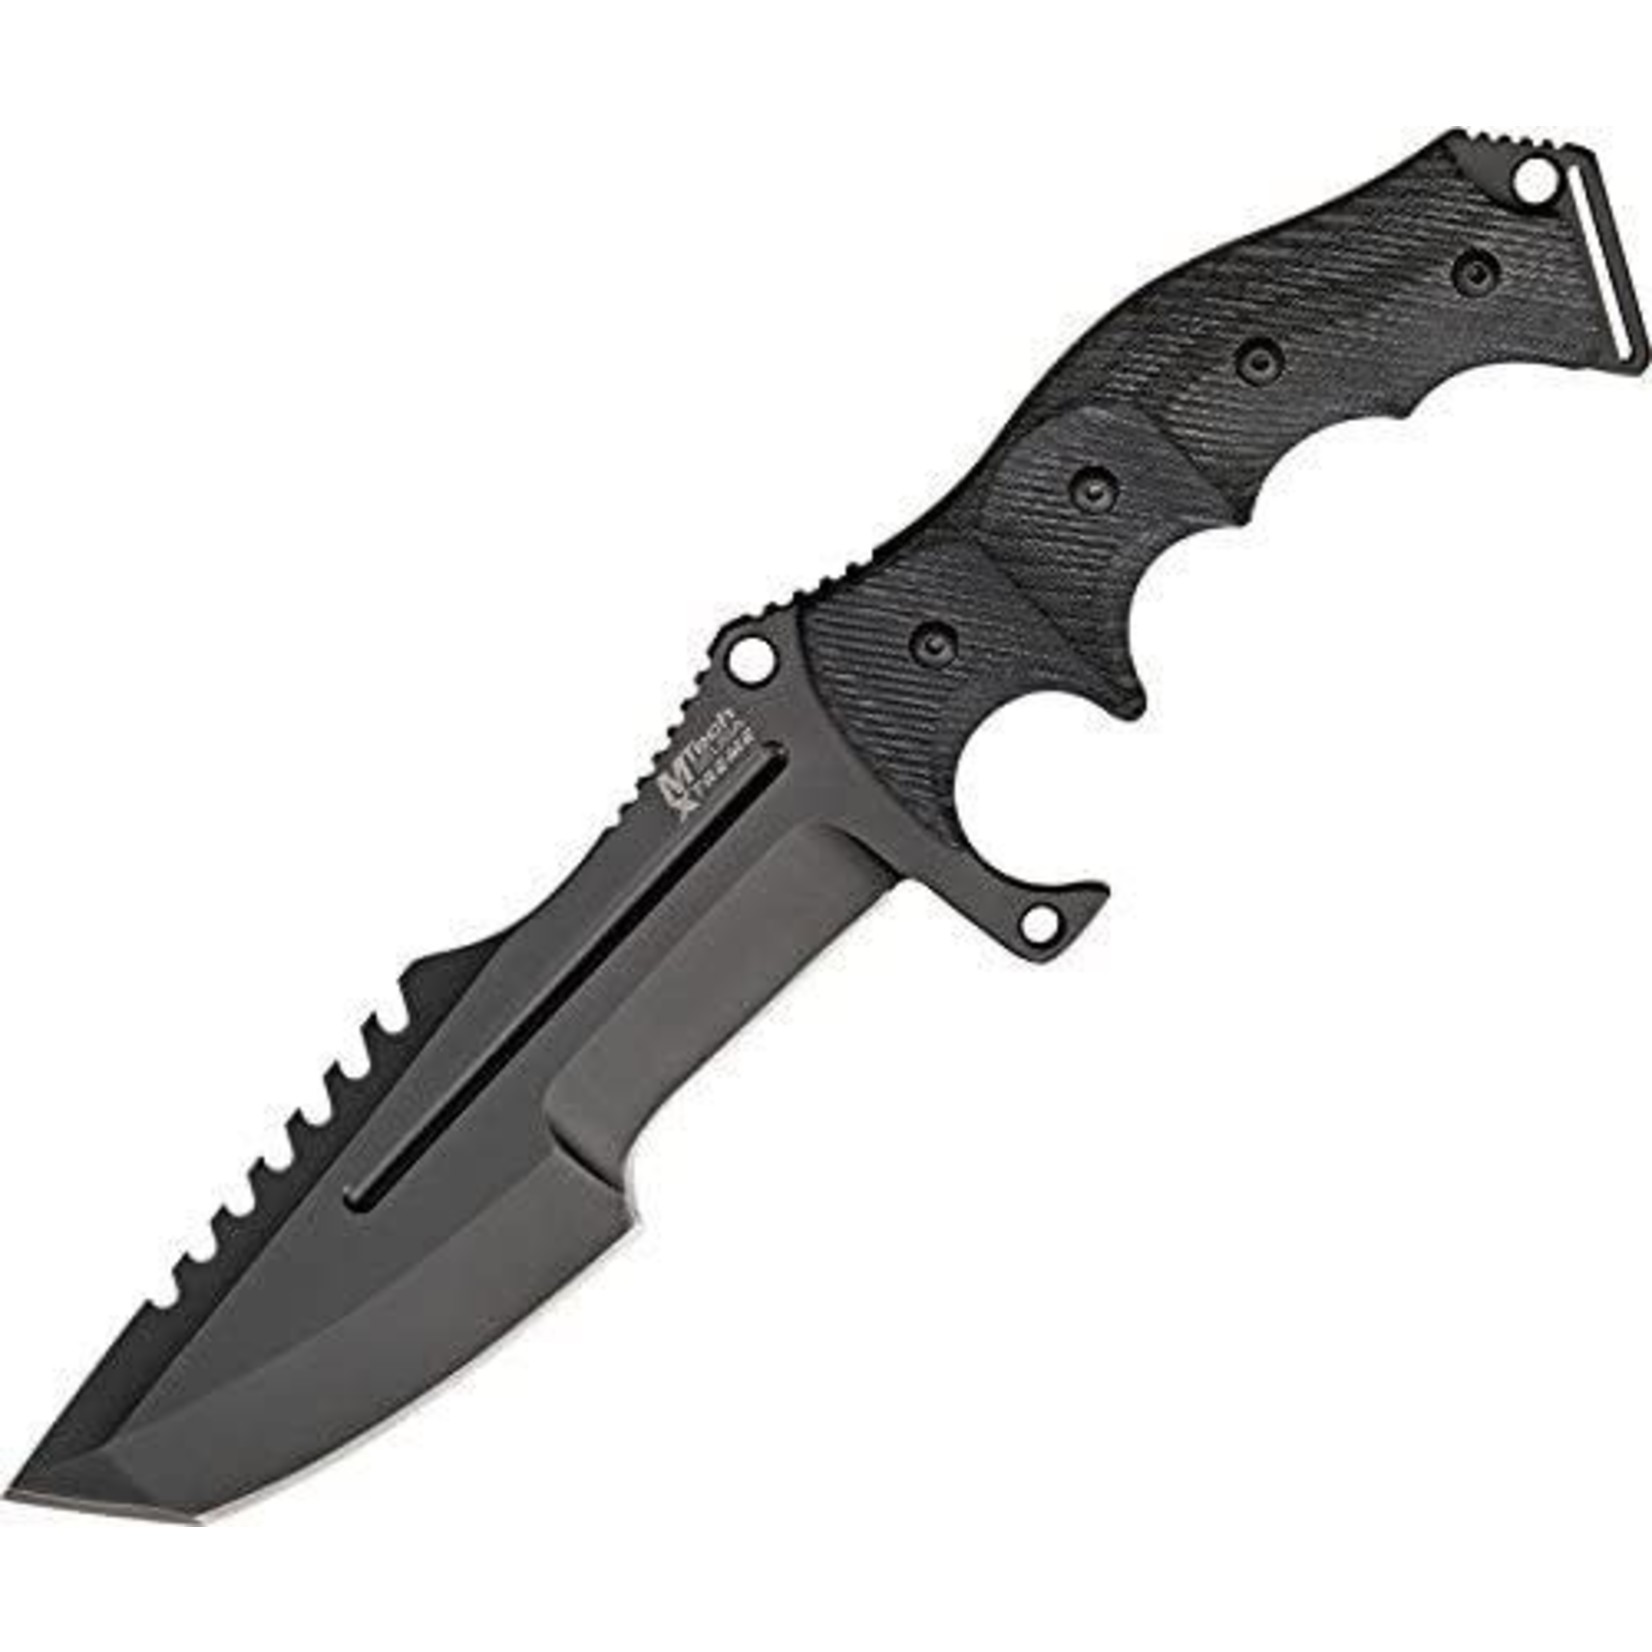 M-Tech USA MTech Xtreme Collector Series 11inch Tactical Knife